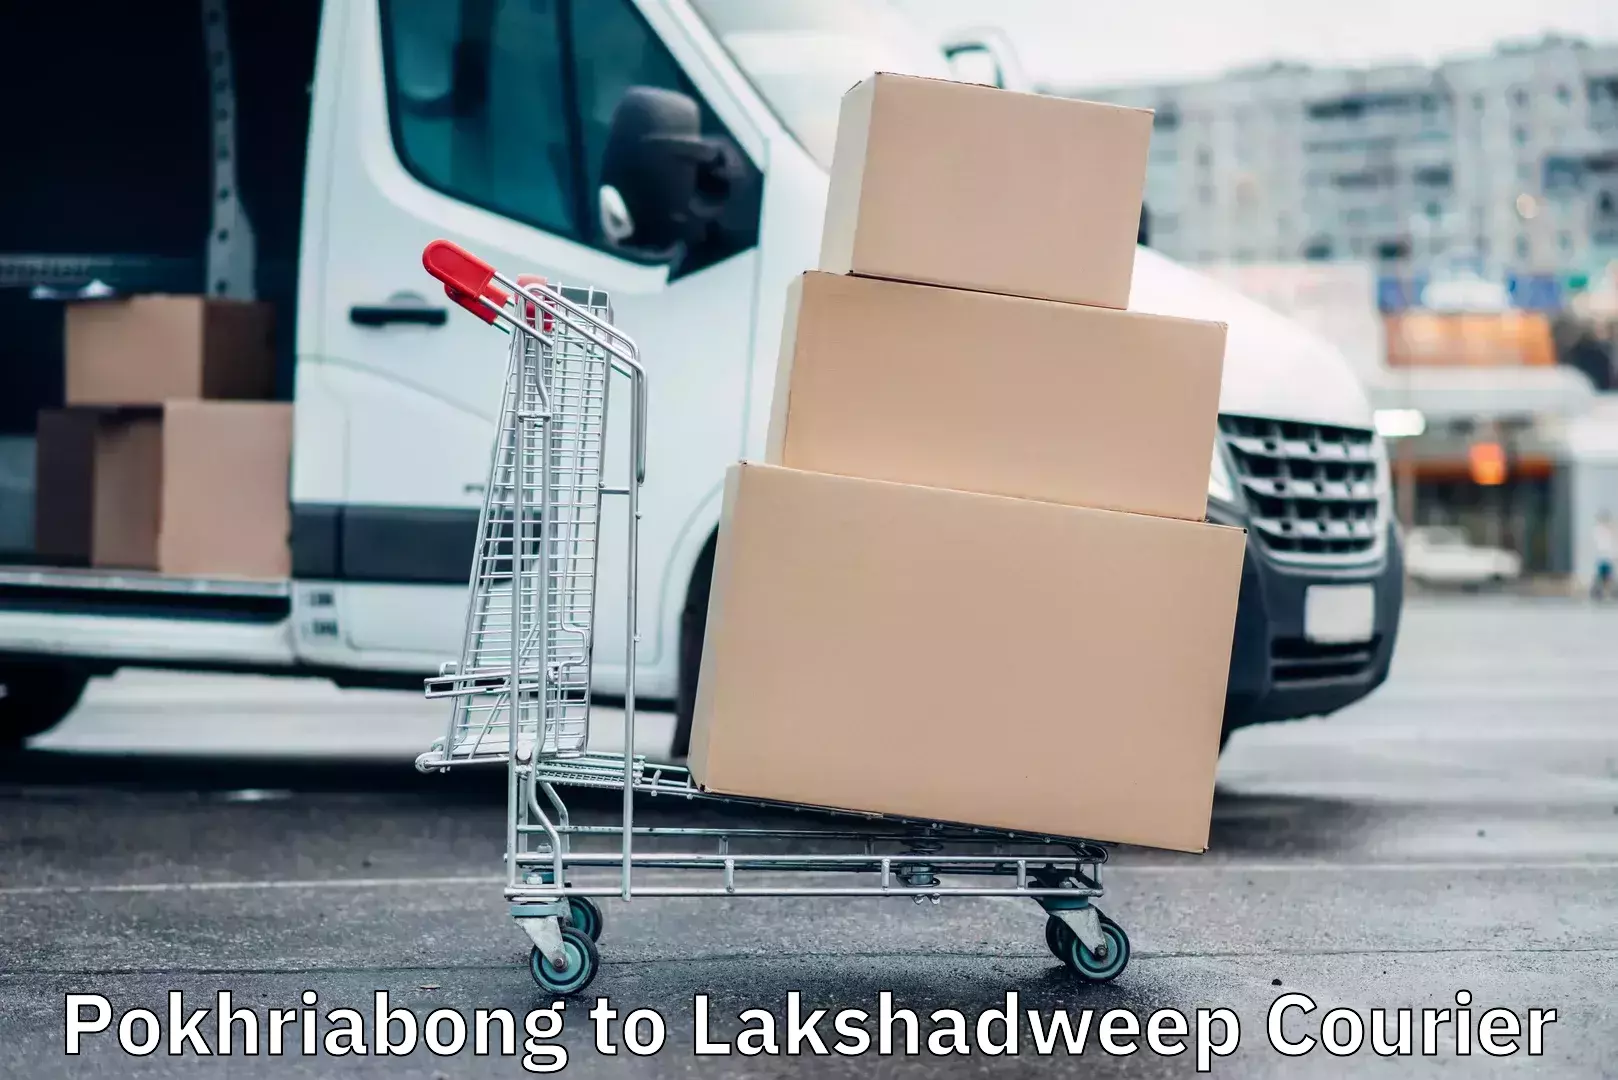 Local delivery service Pokhriabong to Lakshadweep